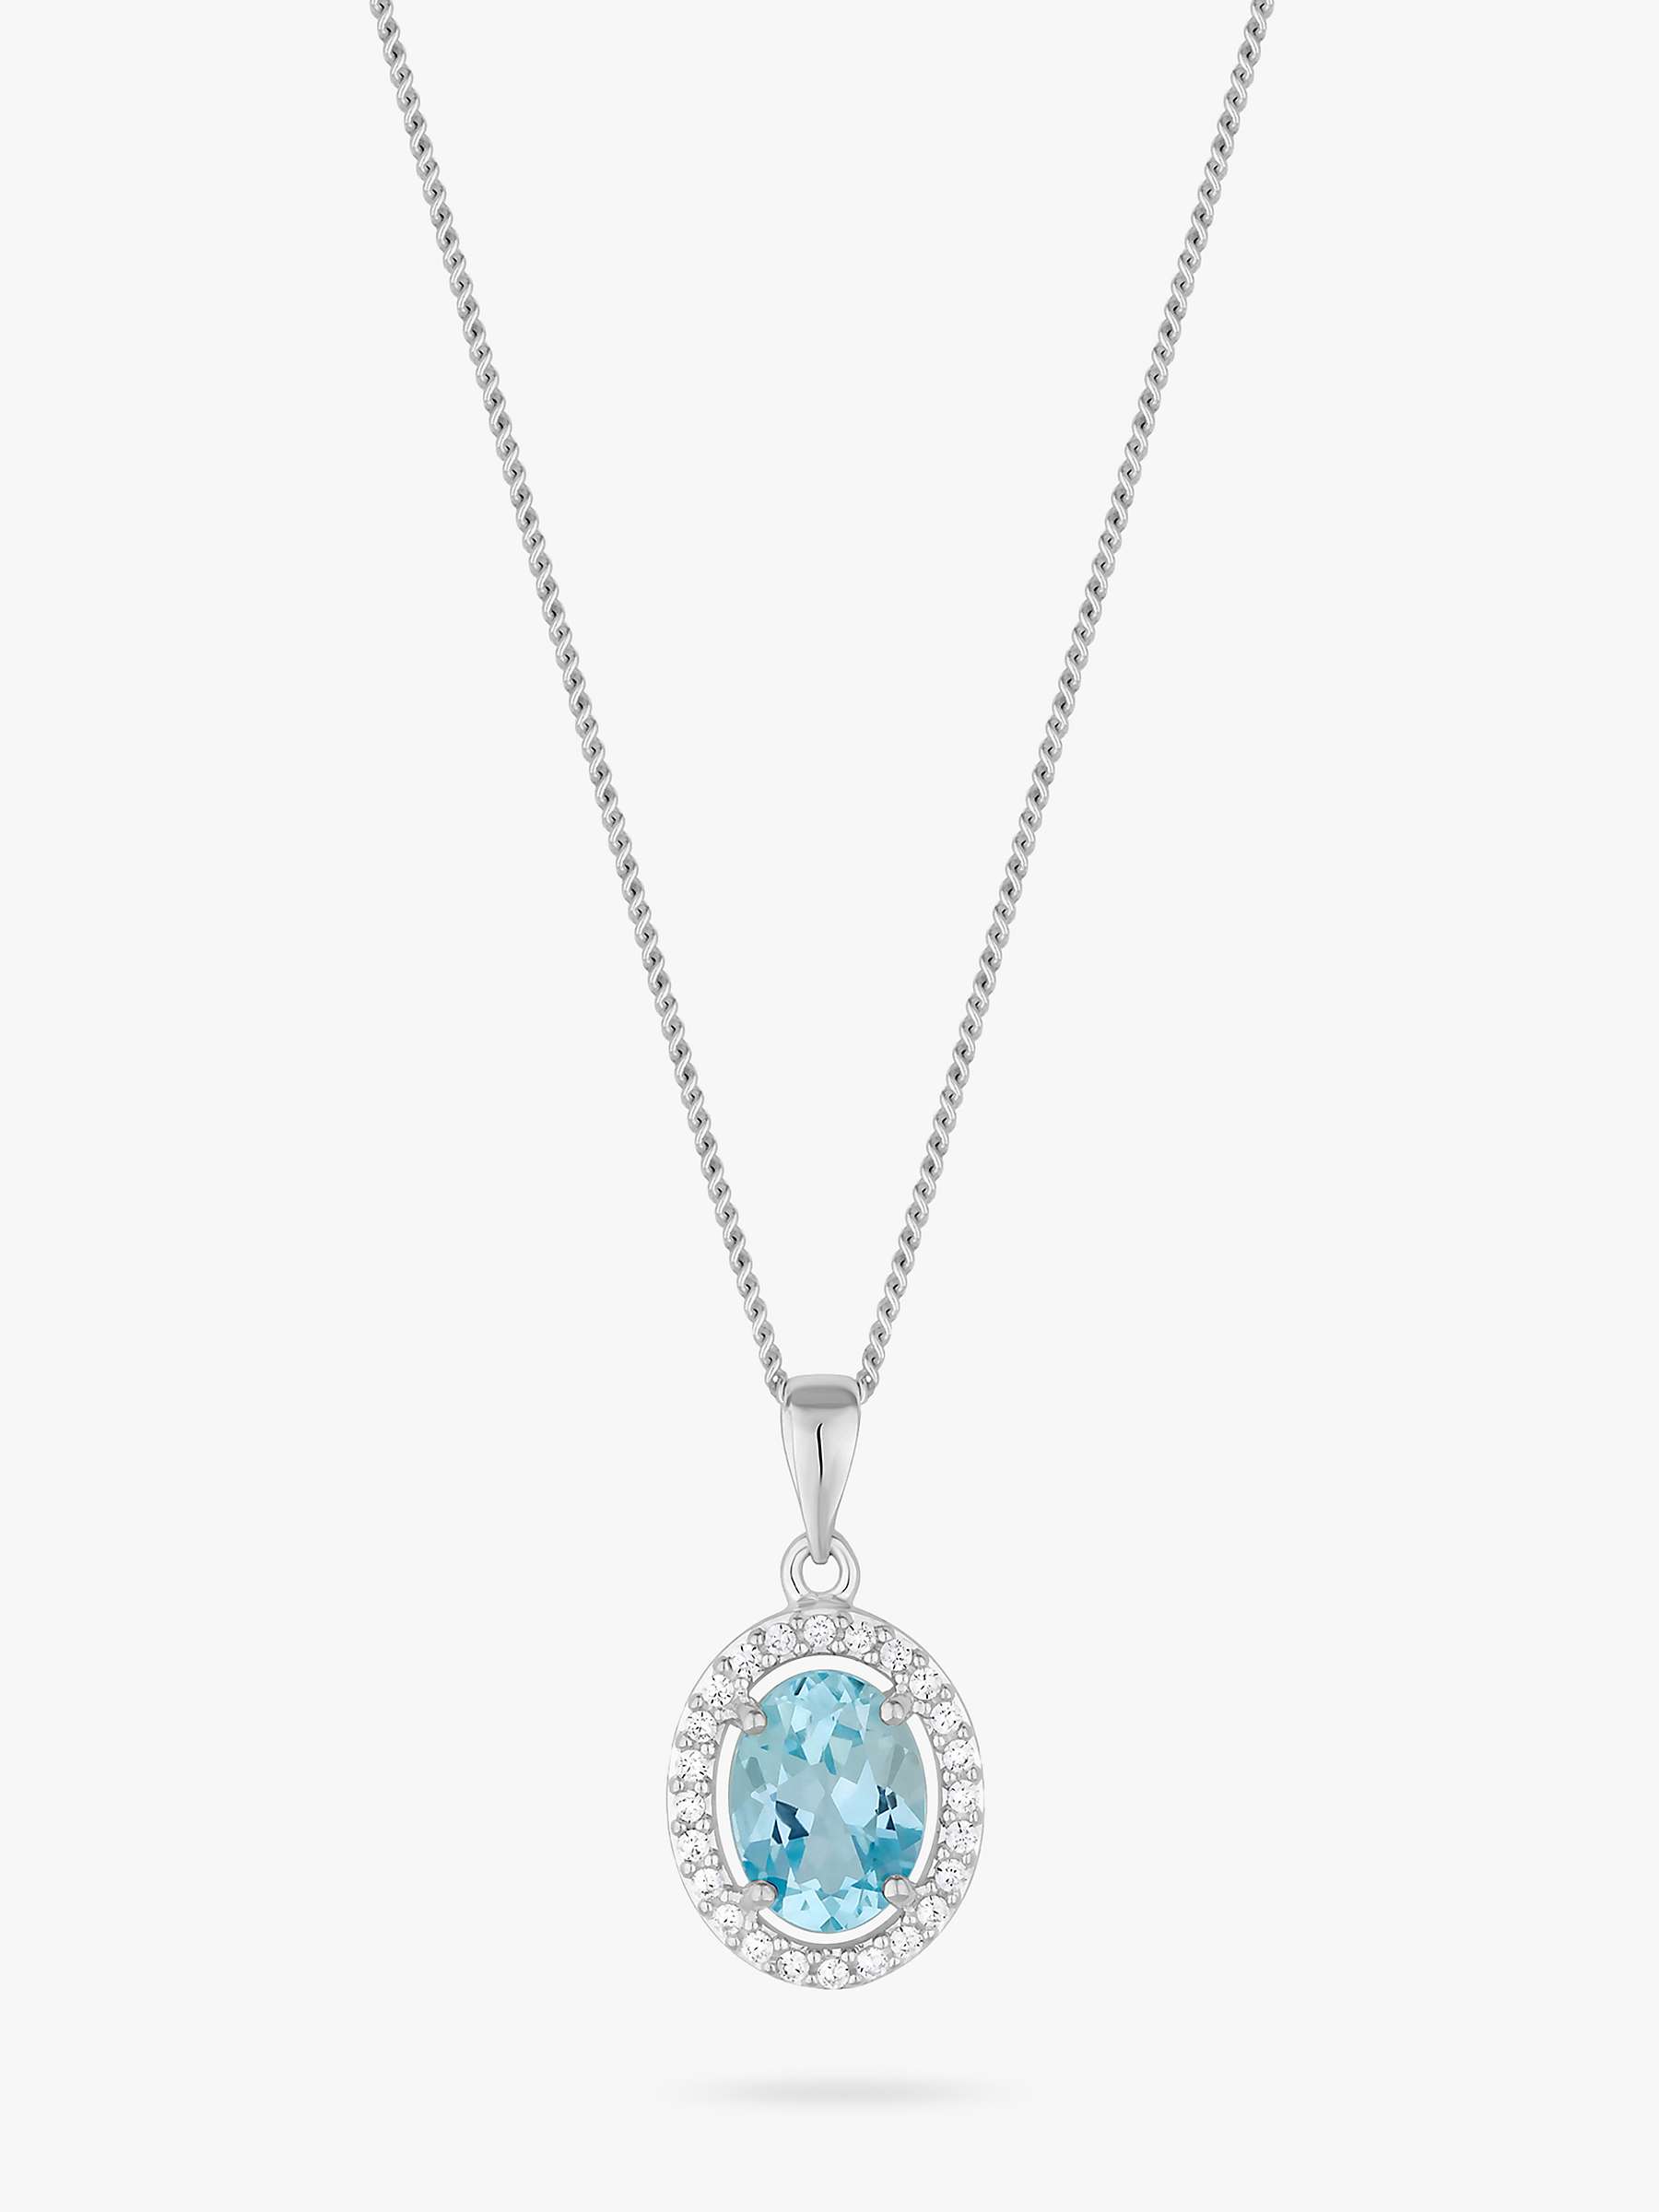 Buy Simply Silver Topaz Halo Pendant Necklace, Silver/Blue Online at johnlewis.com